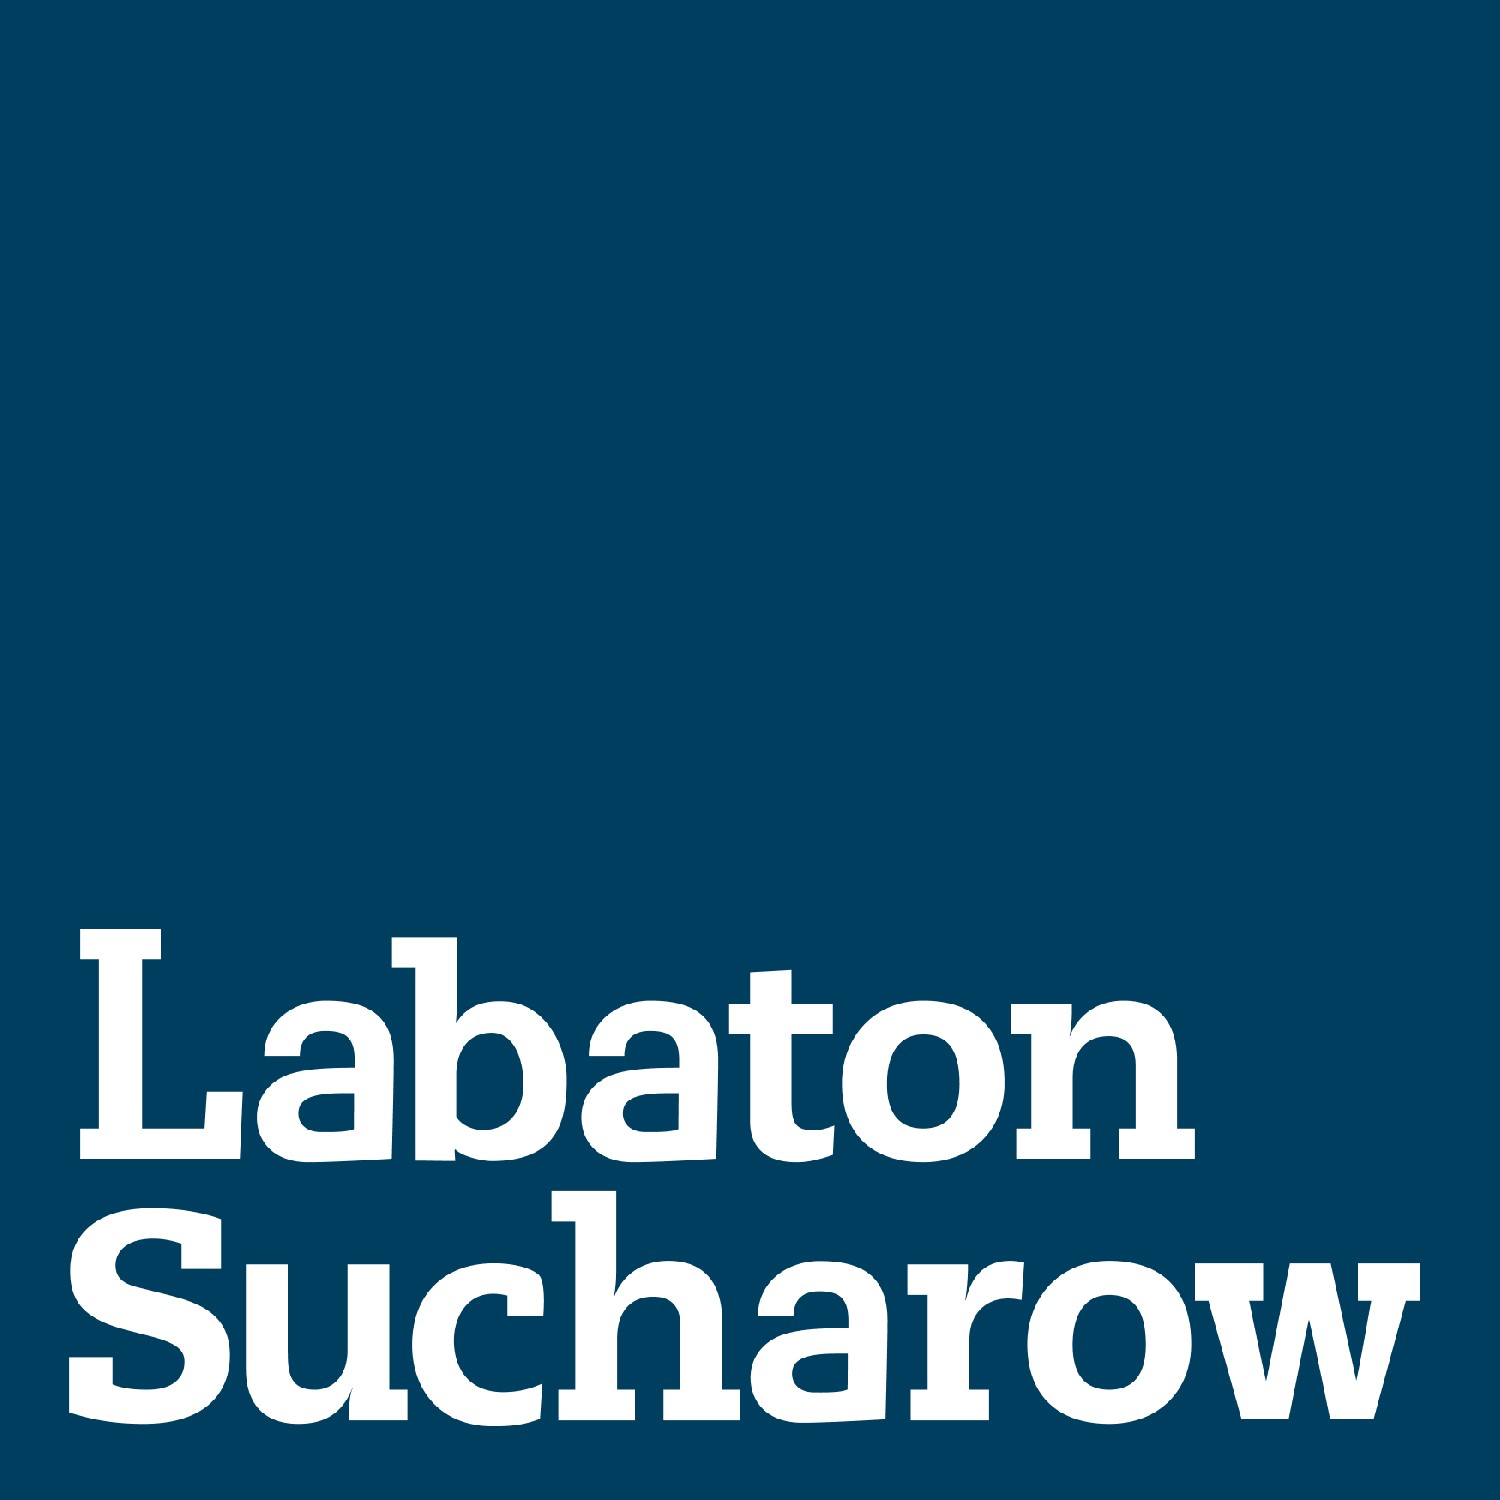 Labaton Sucharow LLP, Tuesday, November 30, 2021, Press release picture